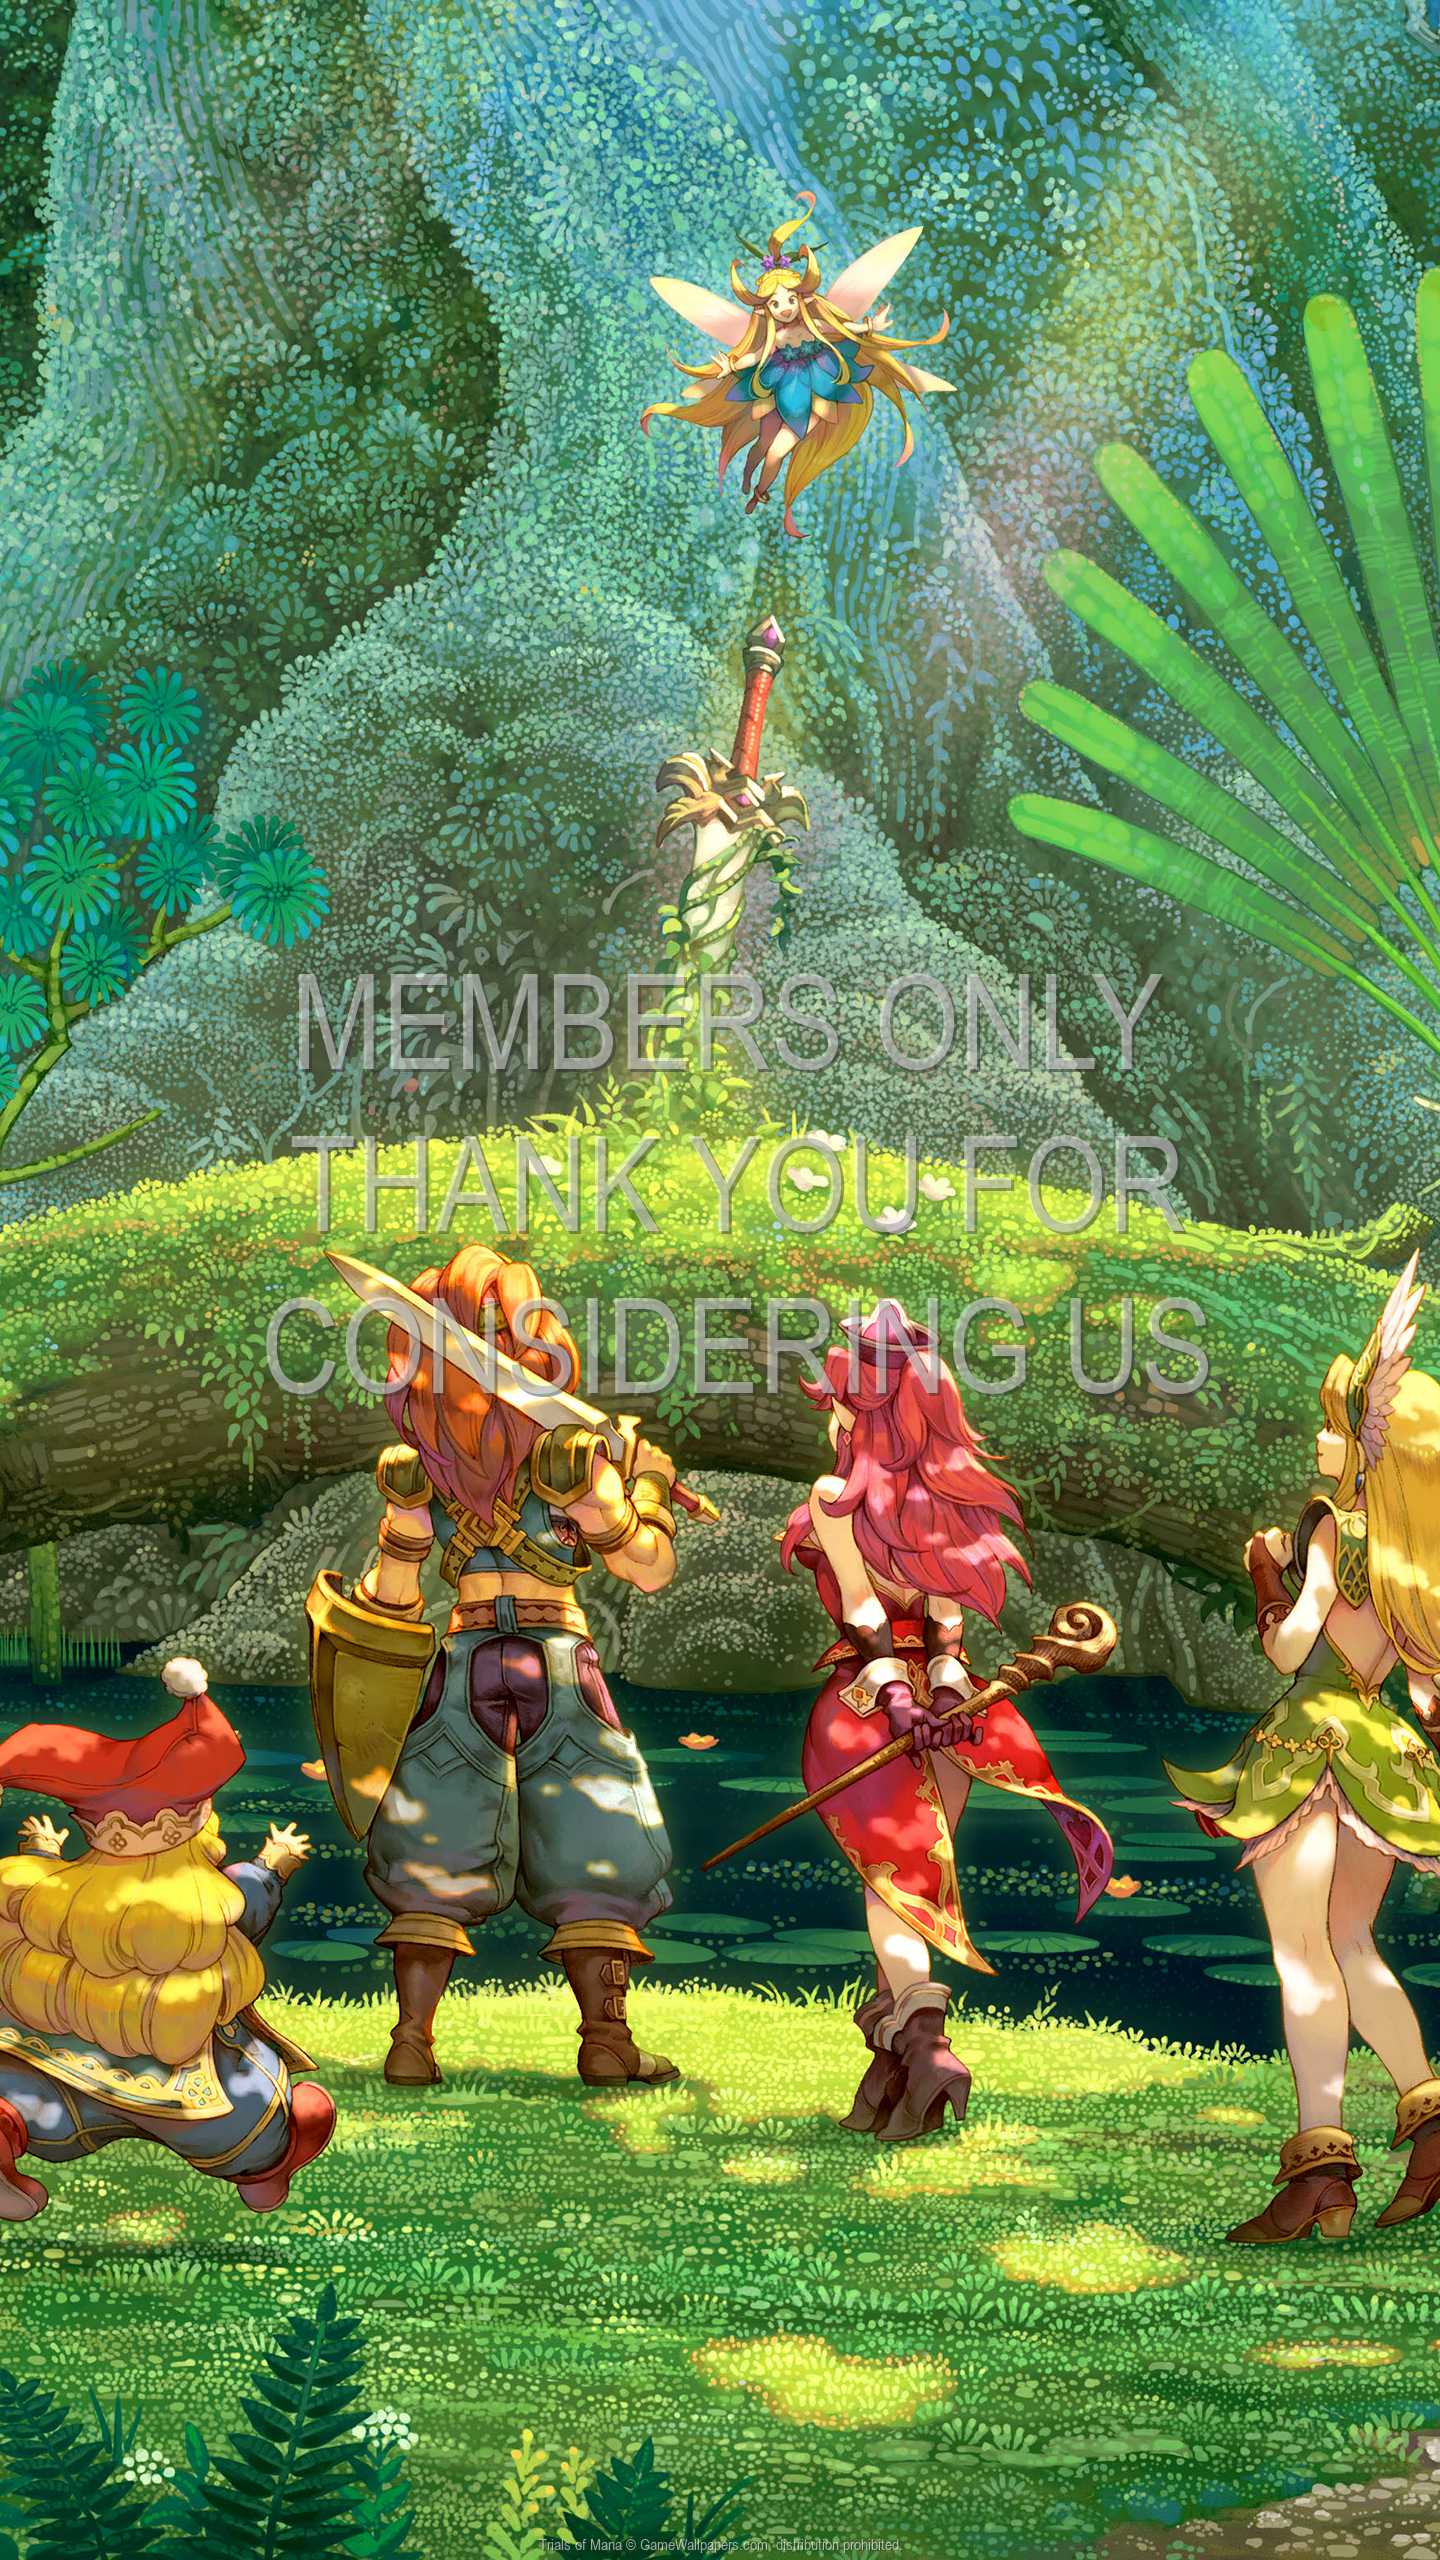 Trials of Mana 1440p%20Vertical Mobile wallpaper or background 01